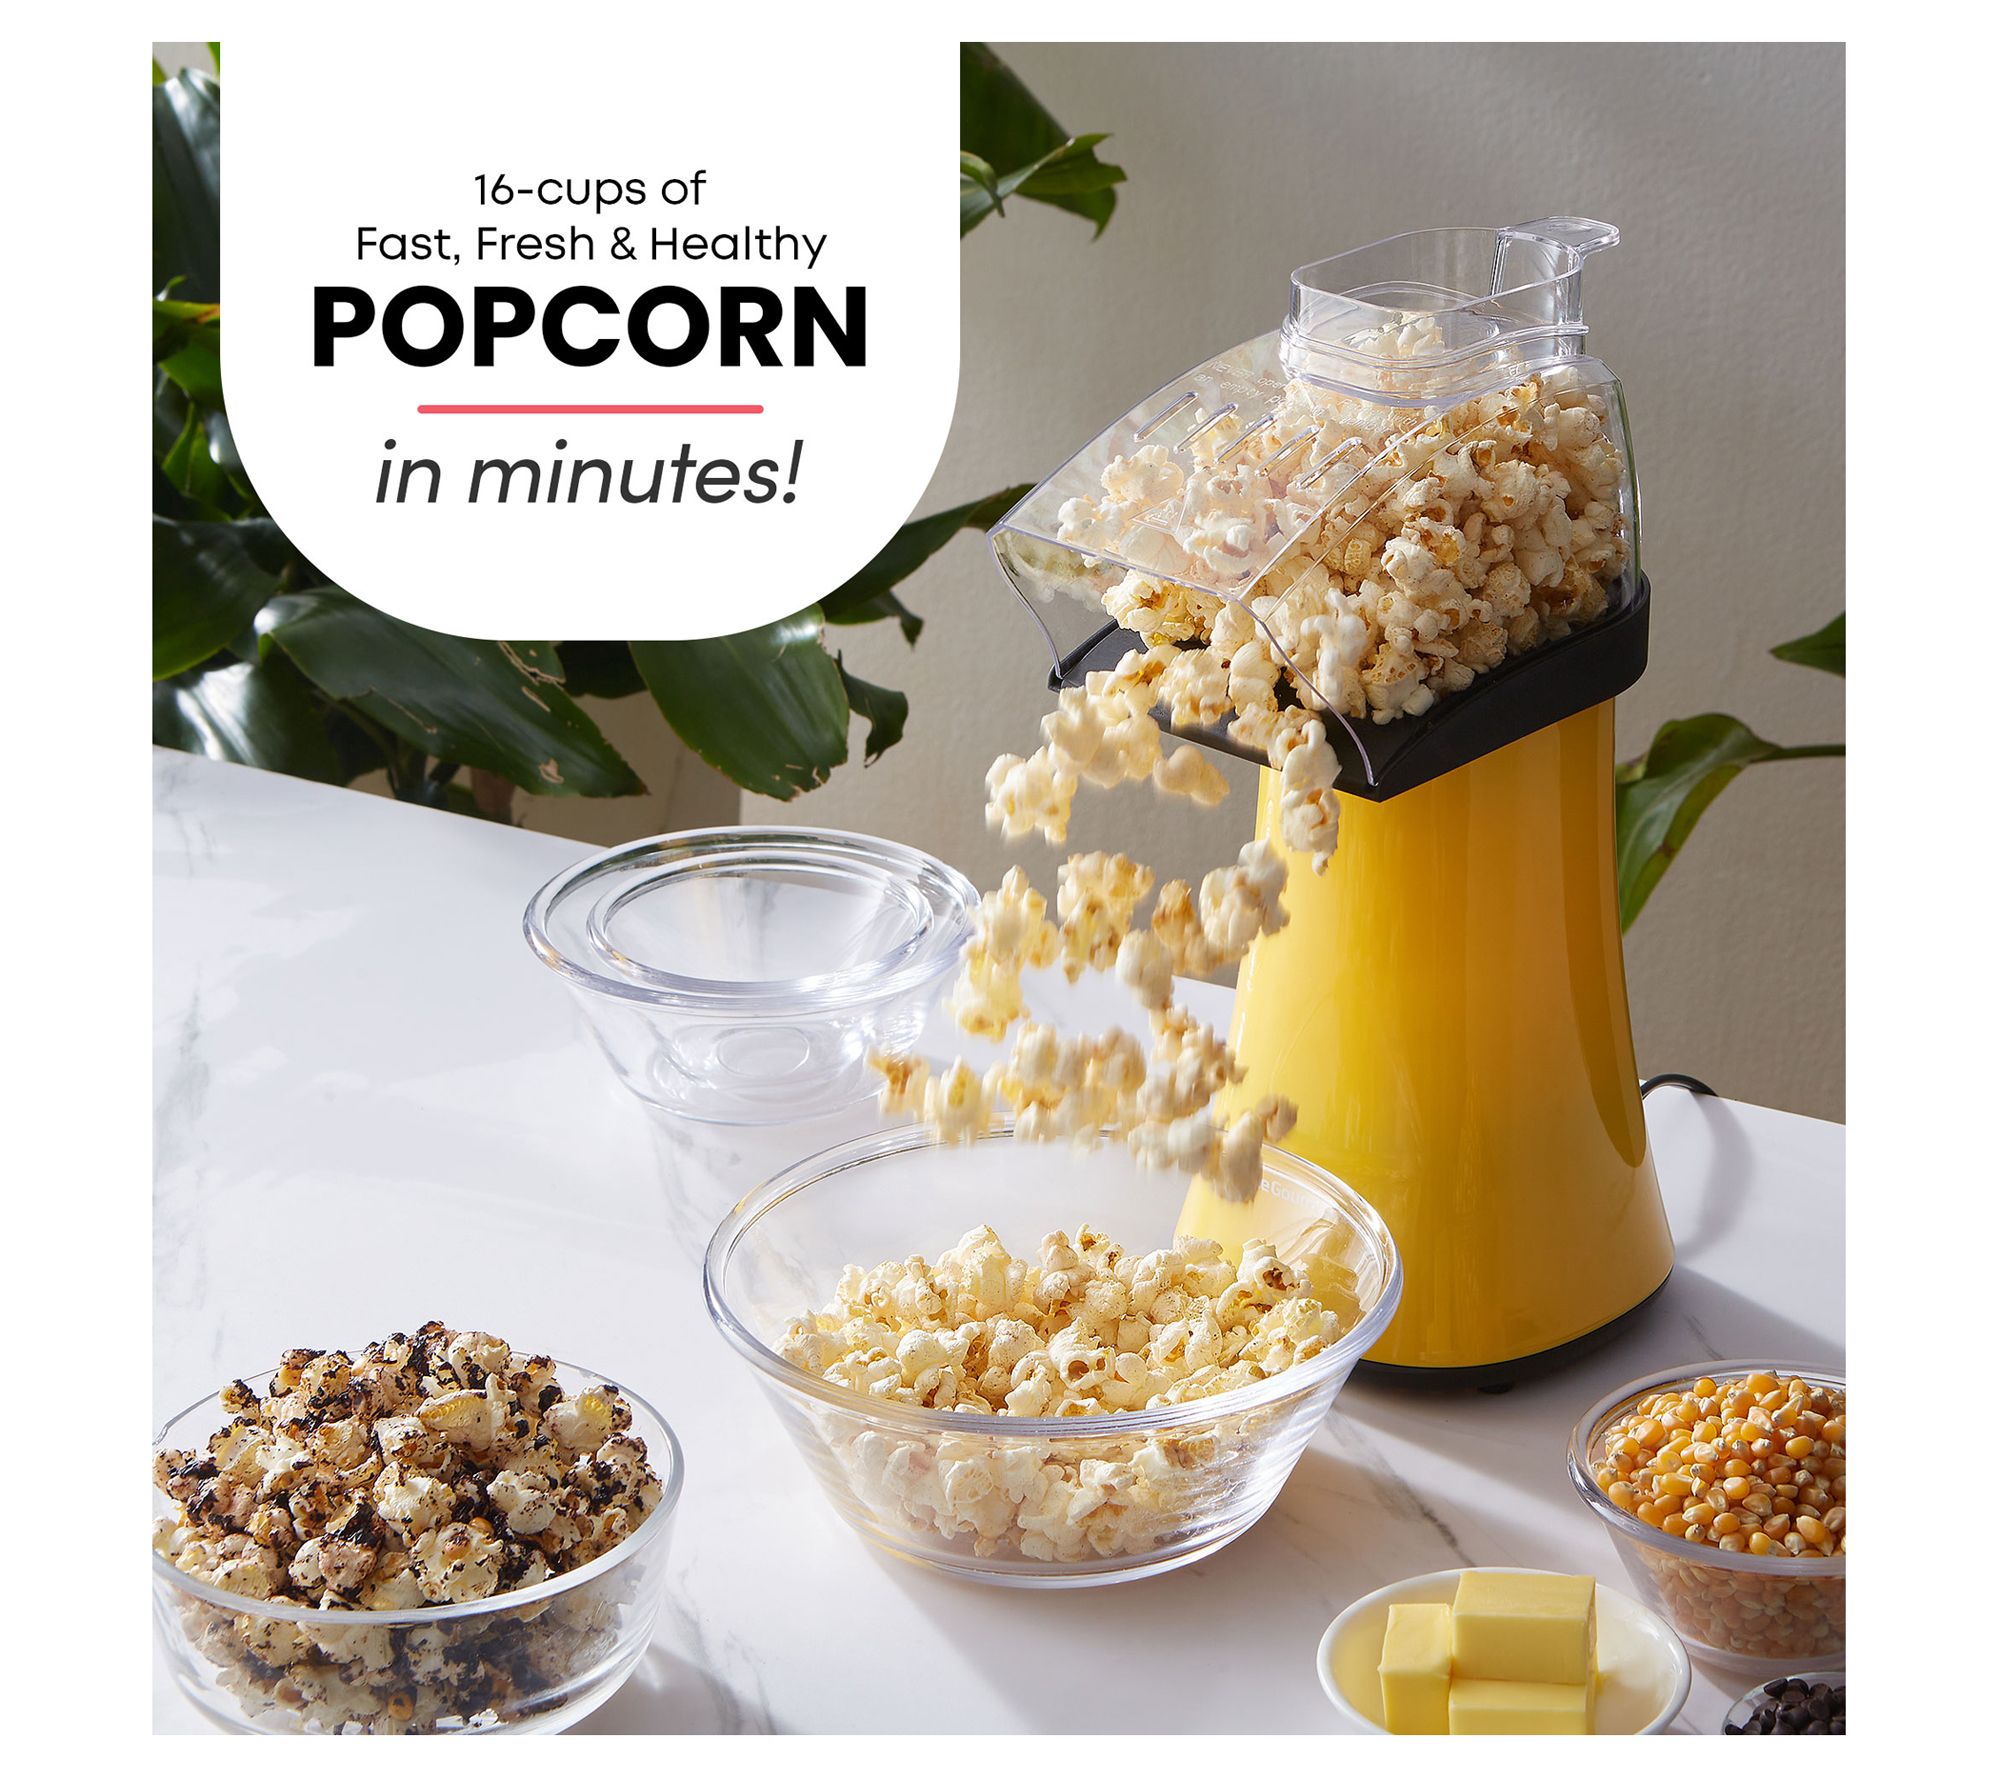 Butter Melter Cup - Popcorn Poppers - Presto®